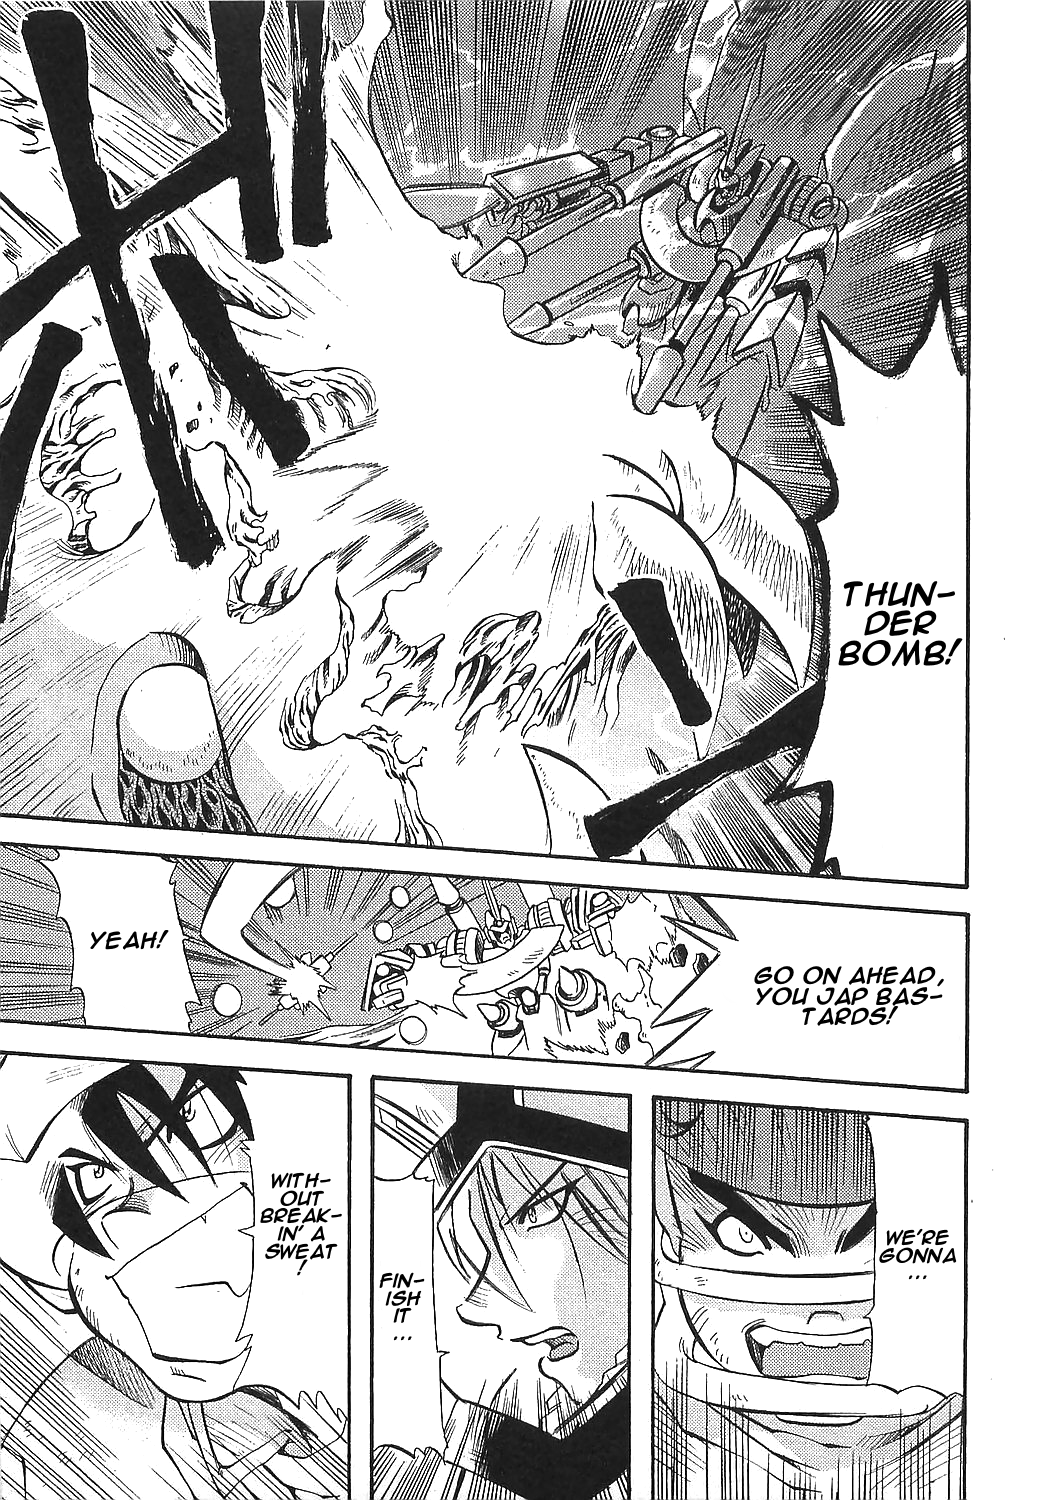 Getter Robo Hien - The Earth Suicide Vol.3 Chapter 13: A New World